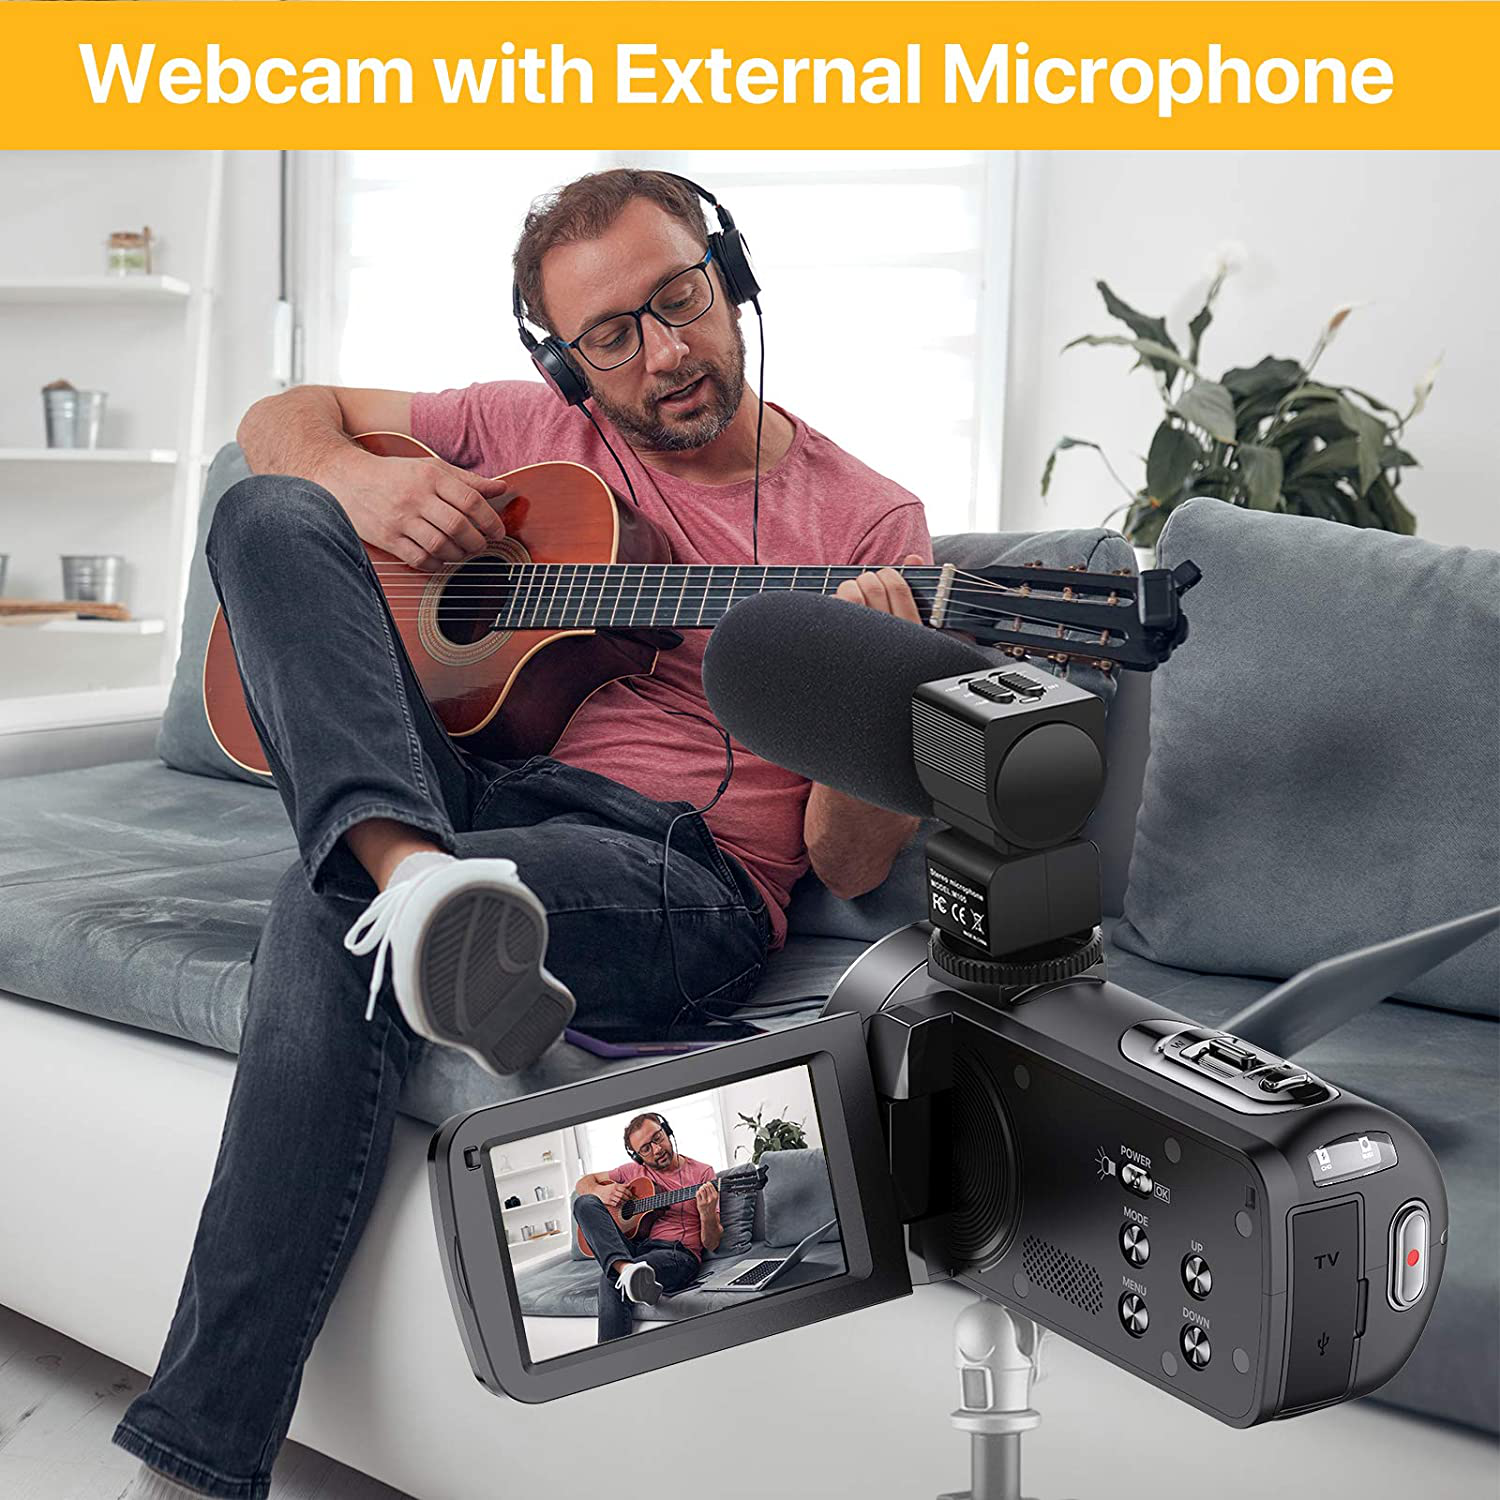 Video Camera Camcorder Ultra HD 2.7K 24FPS 36.0 MP IR Night Vision YouTube Vlogging Camera 3.0 Touch Screen 16X Digital Zoom with Remote Control Microphone Handheld Stabilizer 2 Batteries